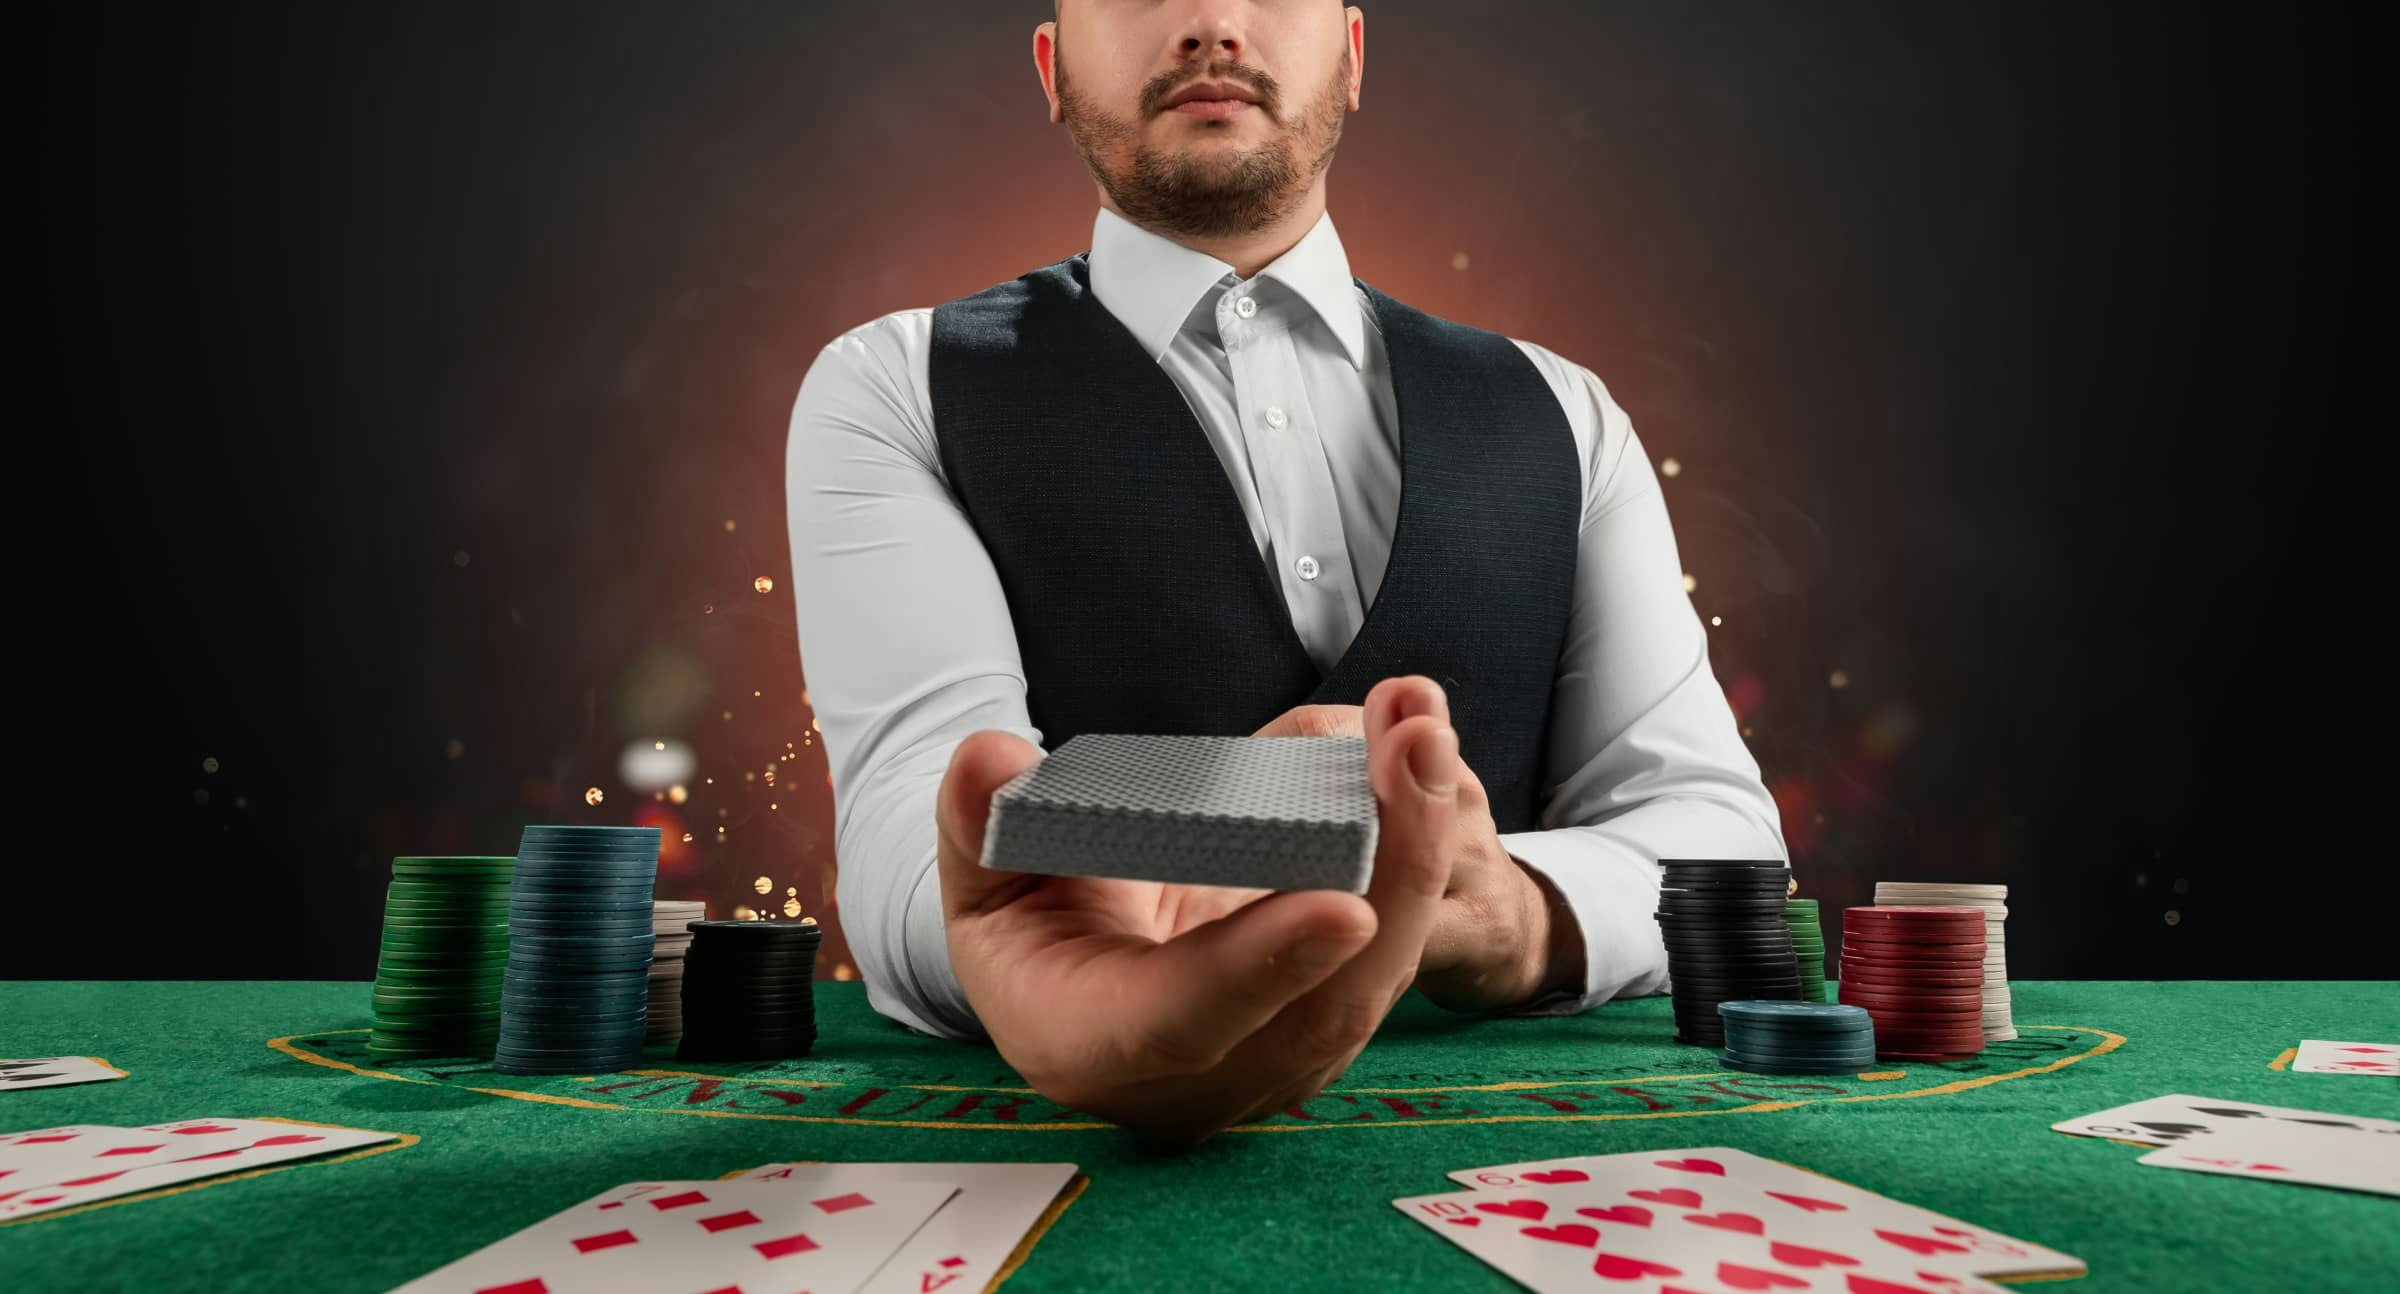 How do First person live dealer games work?